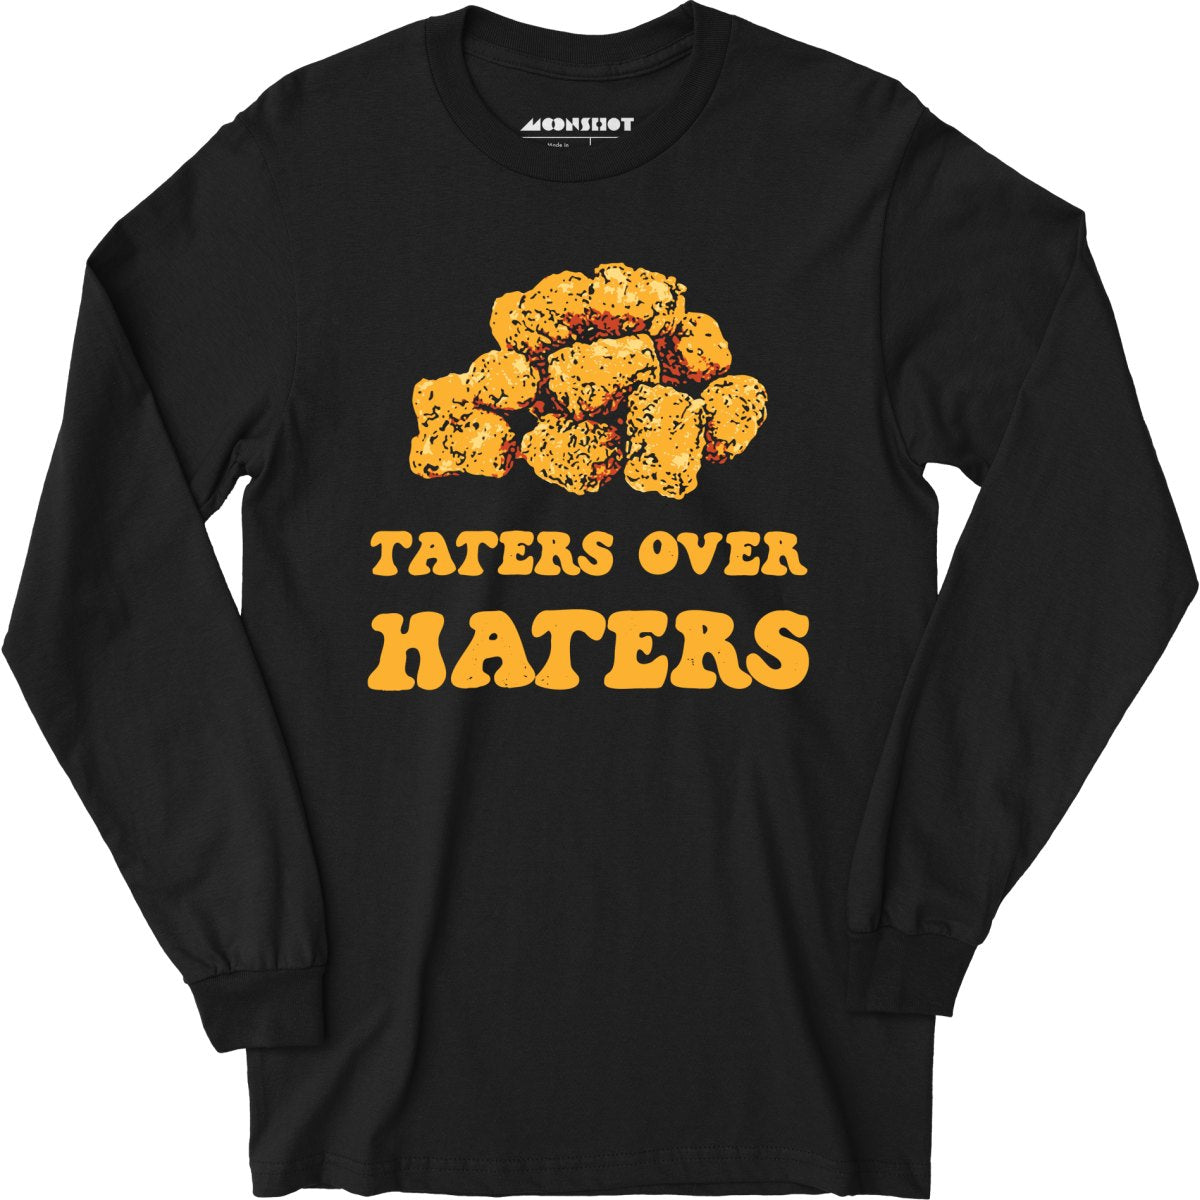 Taters Over Haters - Long Sleeve T-Shirt